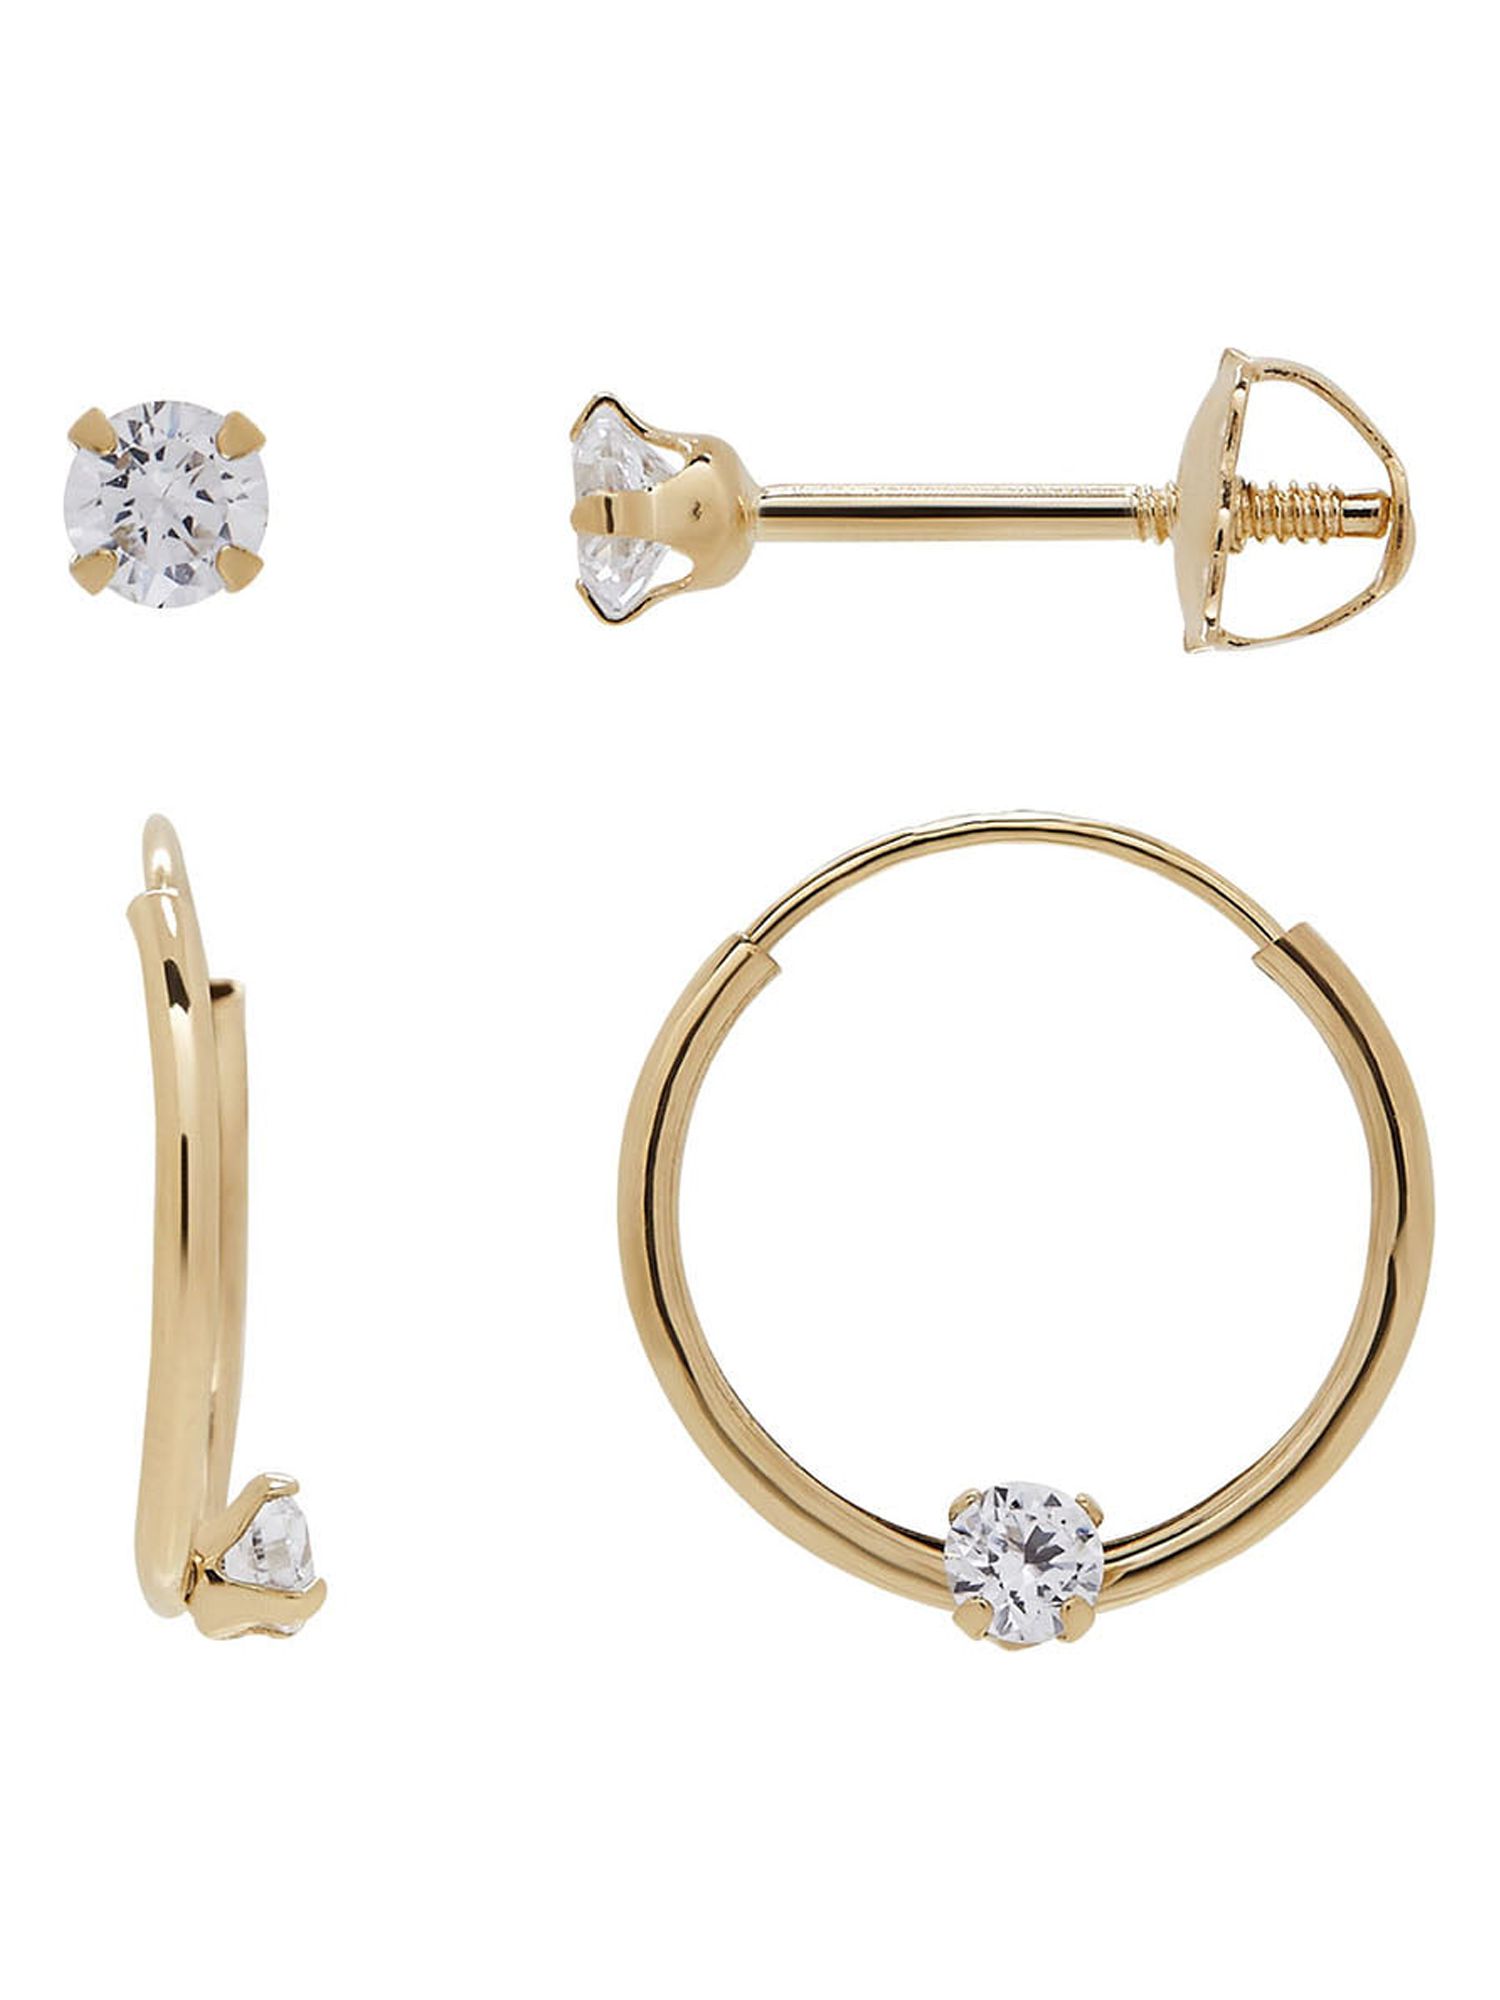 Brilliance Fine Jewelry Hoop with CZ and CZ Studs 10K Yellow Gold Set Earrings - image 1 of 8